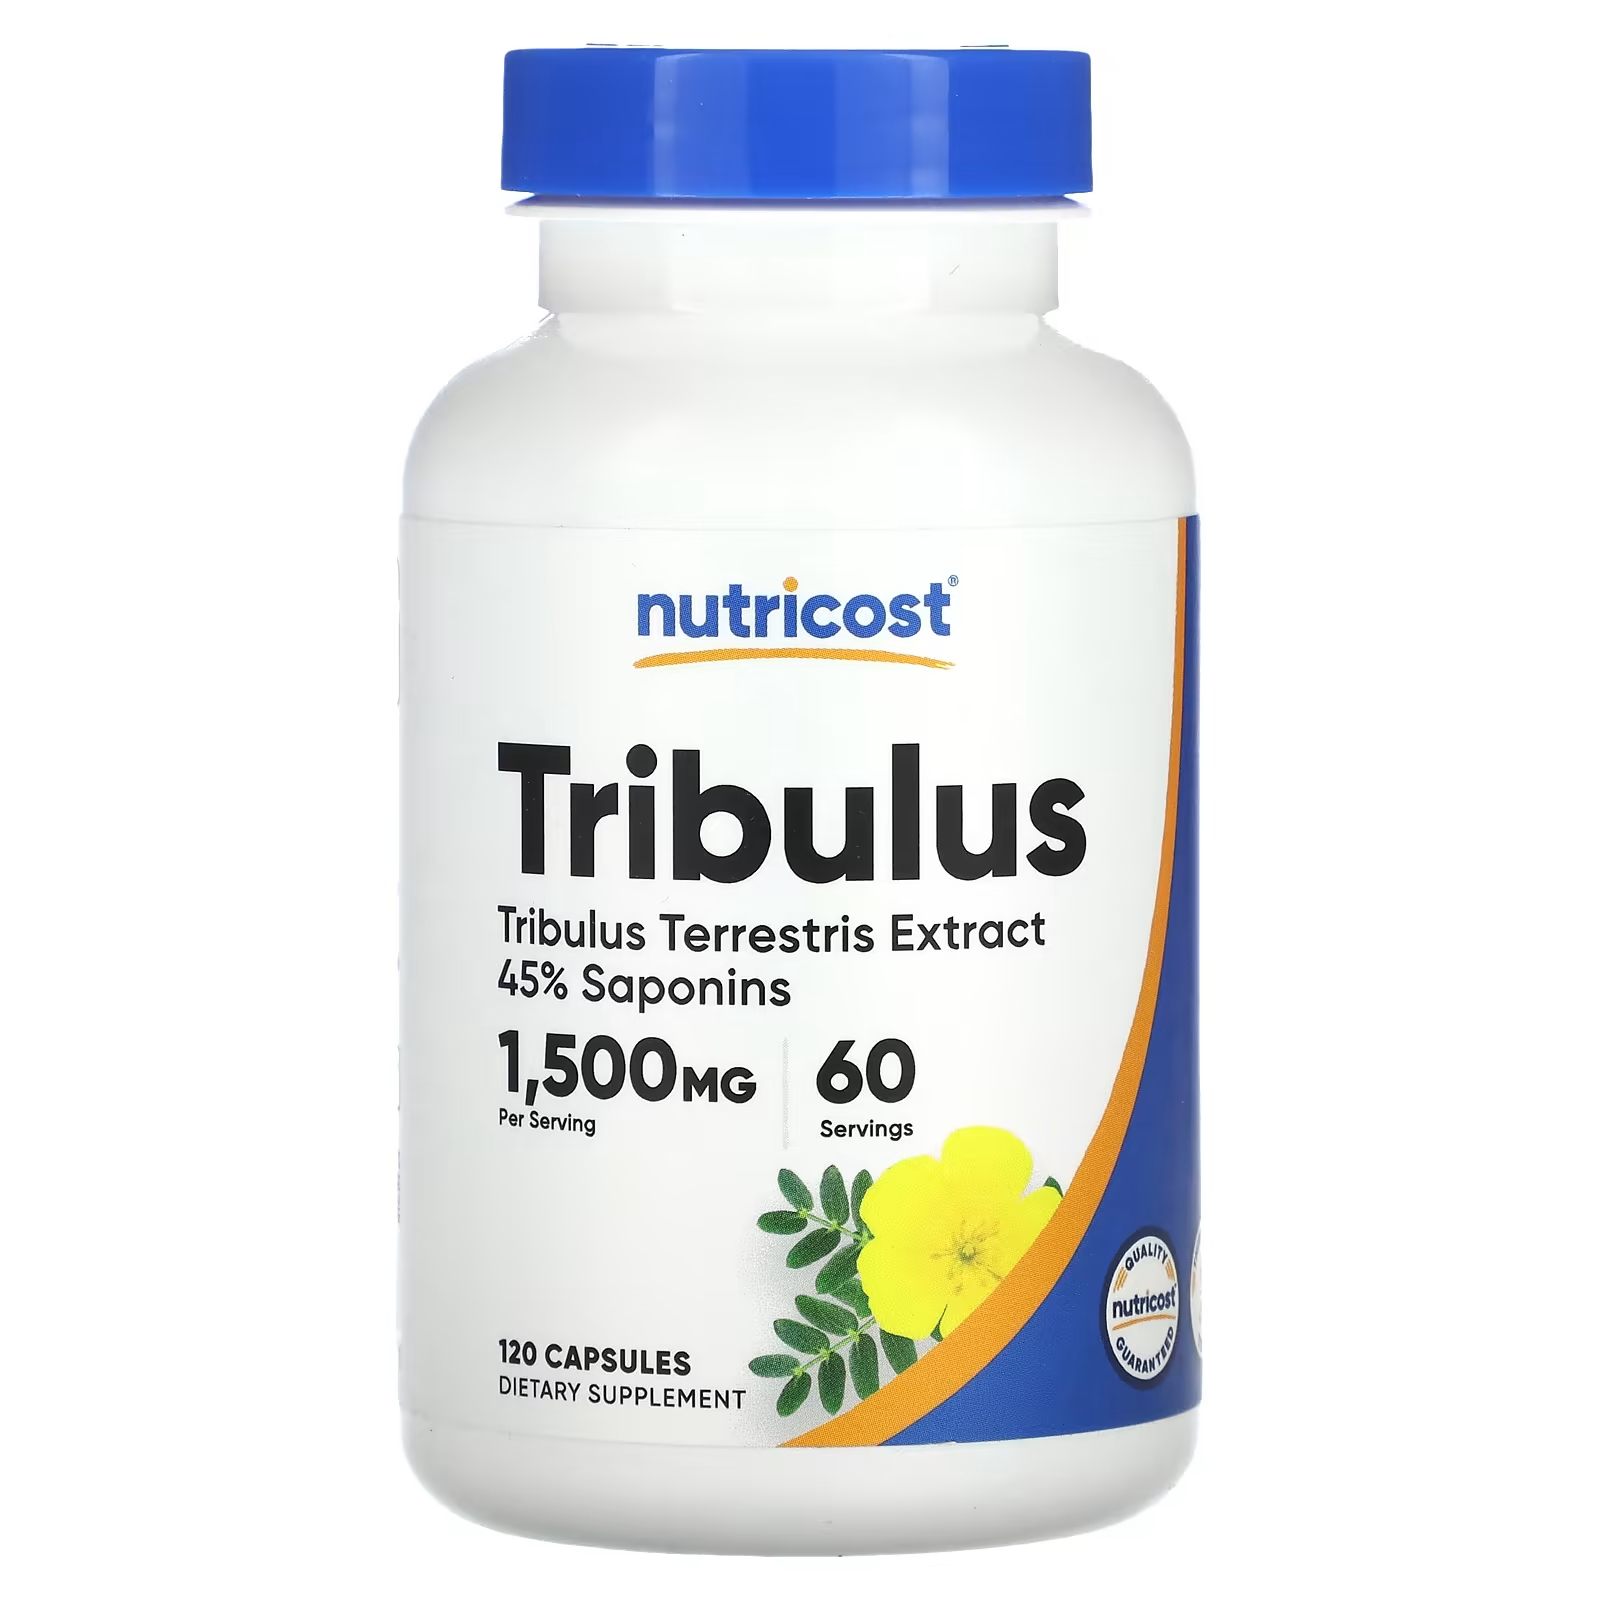 Nutricost Tribulus 1500 мг 120 капсул (750 мг на капсулу) nutricost гриб рейши 750 мг 120 капсул